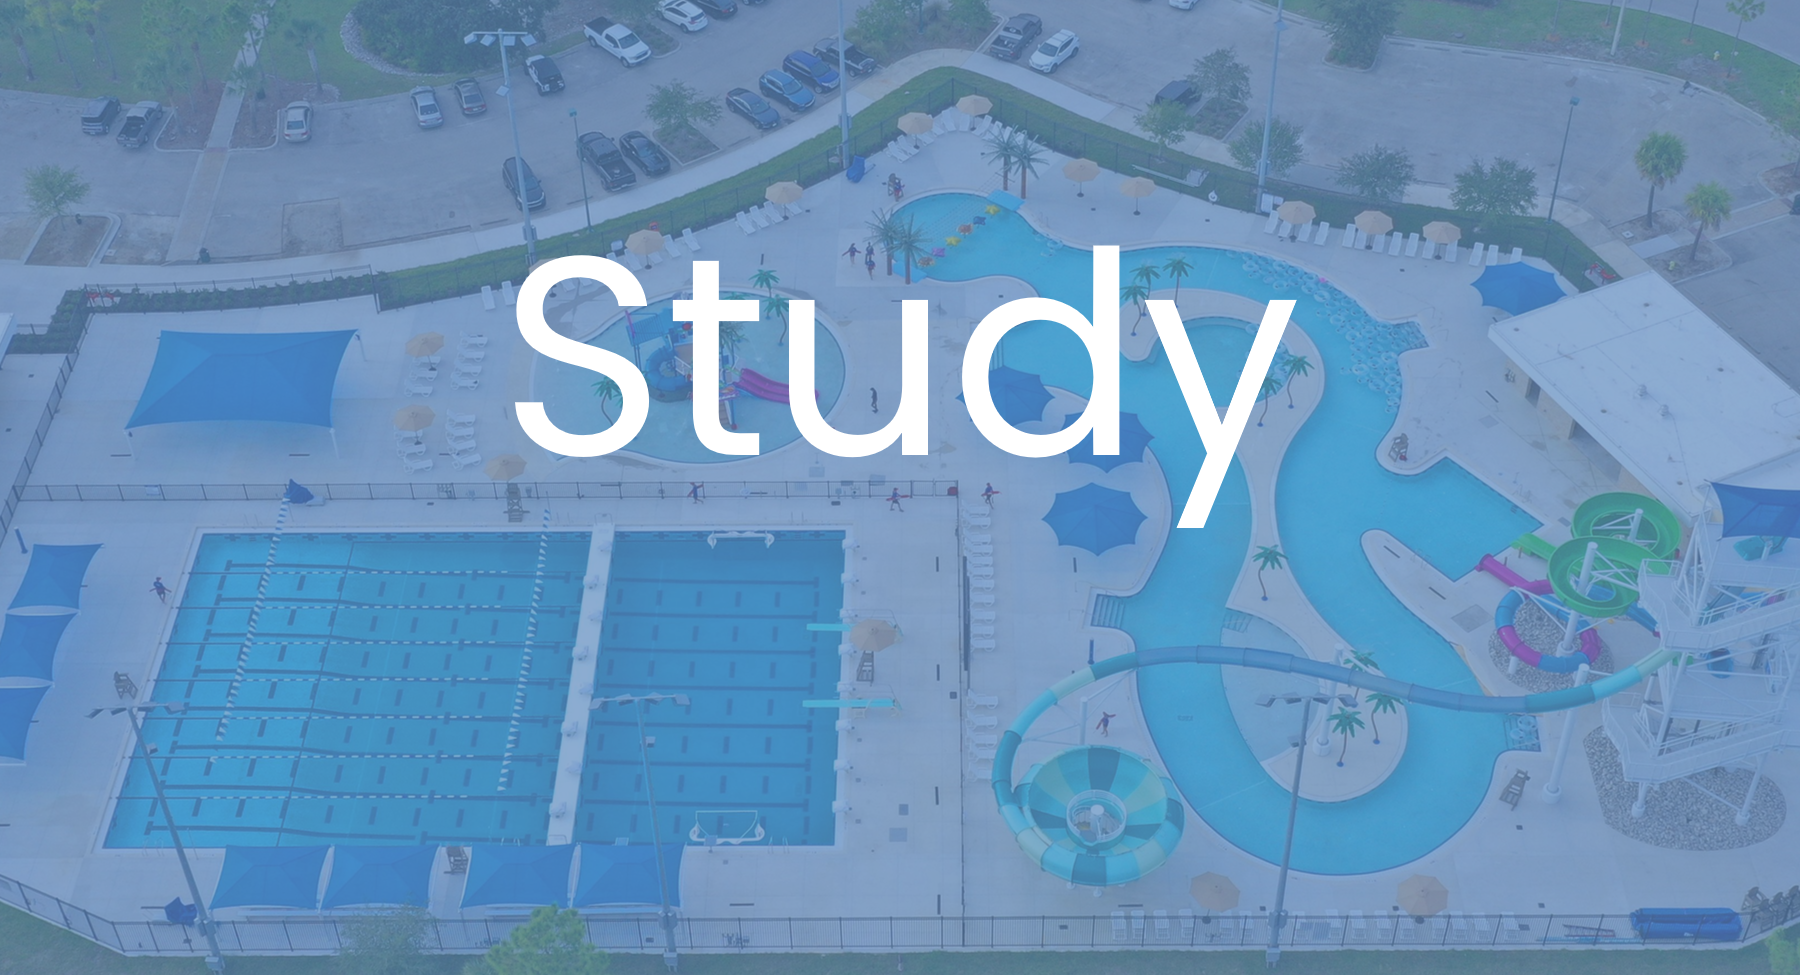 Feasibility study master plans counsilman-hunsaker swimming pool renovation reconstruction leisure competitive water park